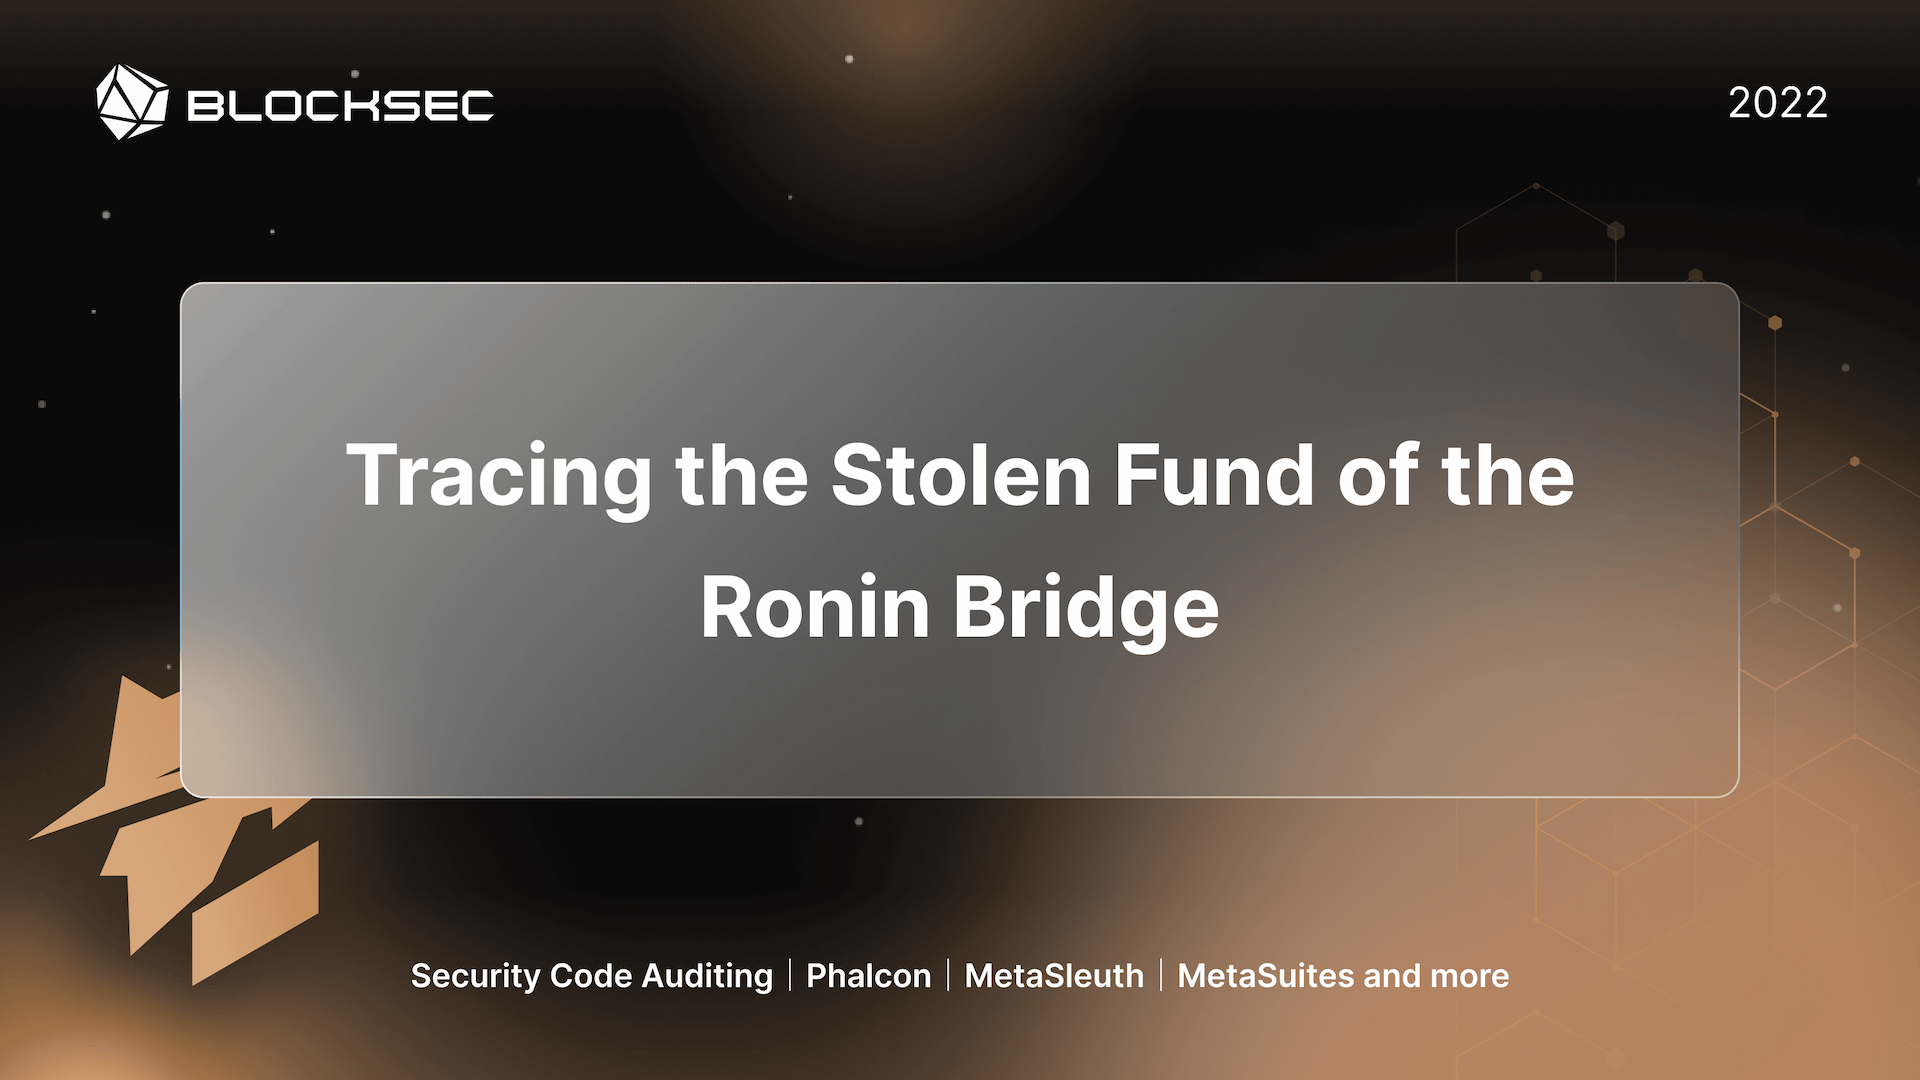 Tracing the Stolen Fund of the Ronin Bridge